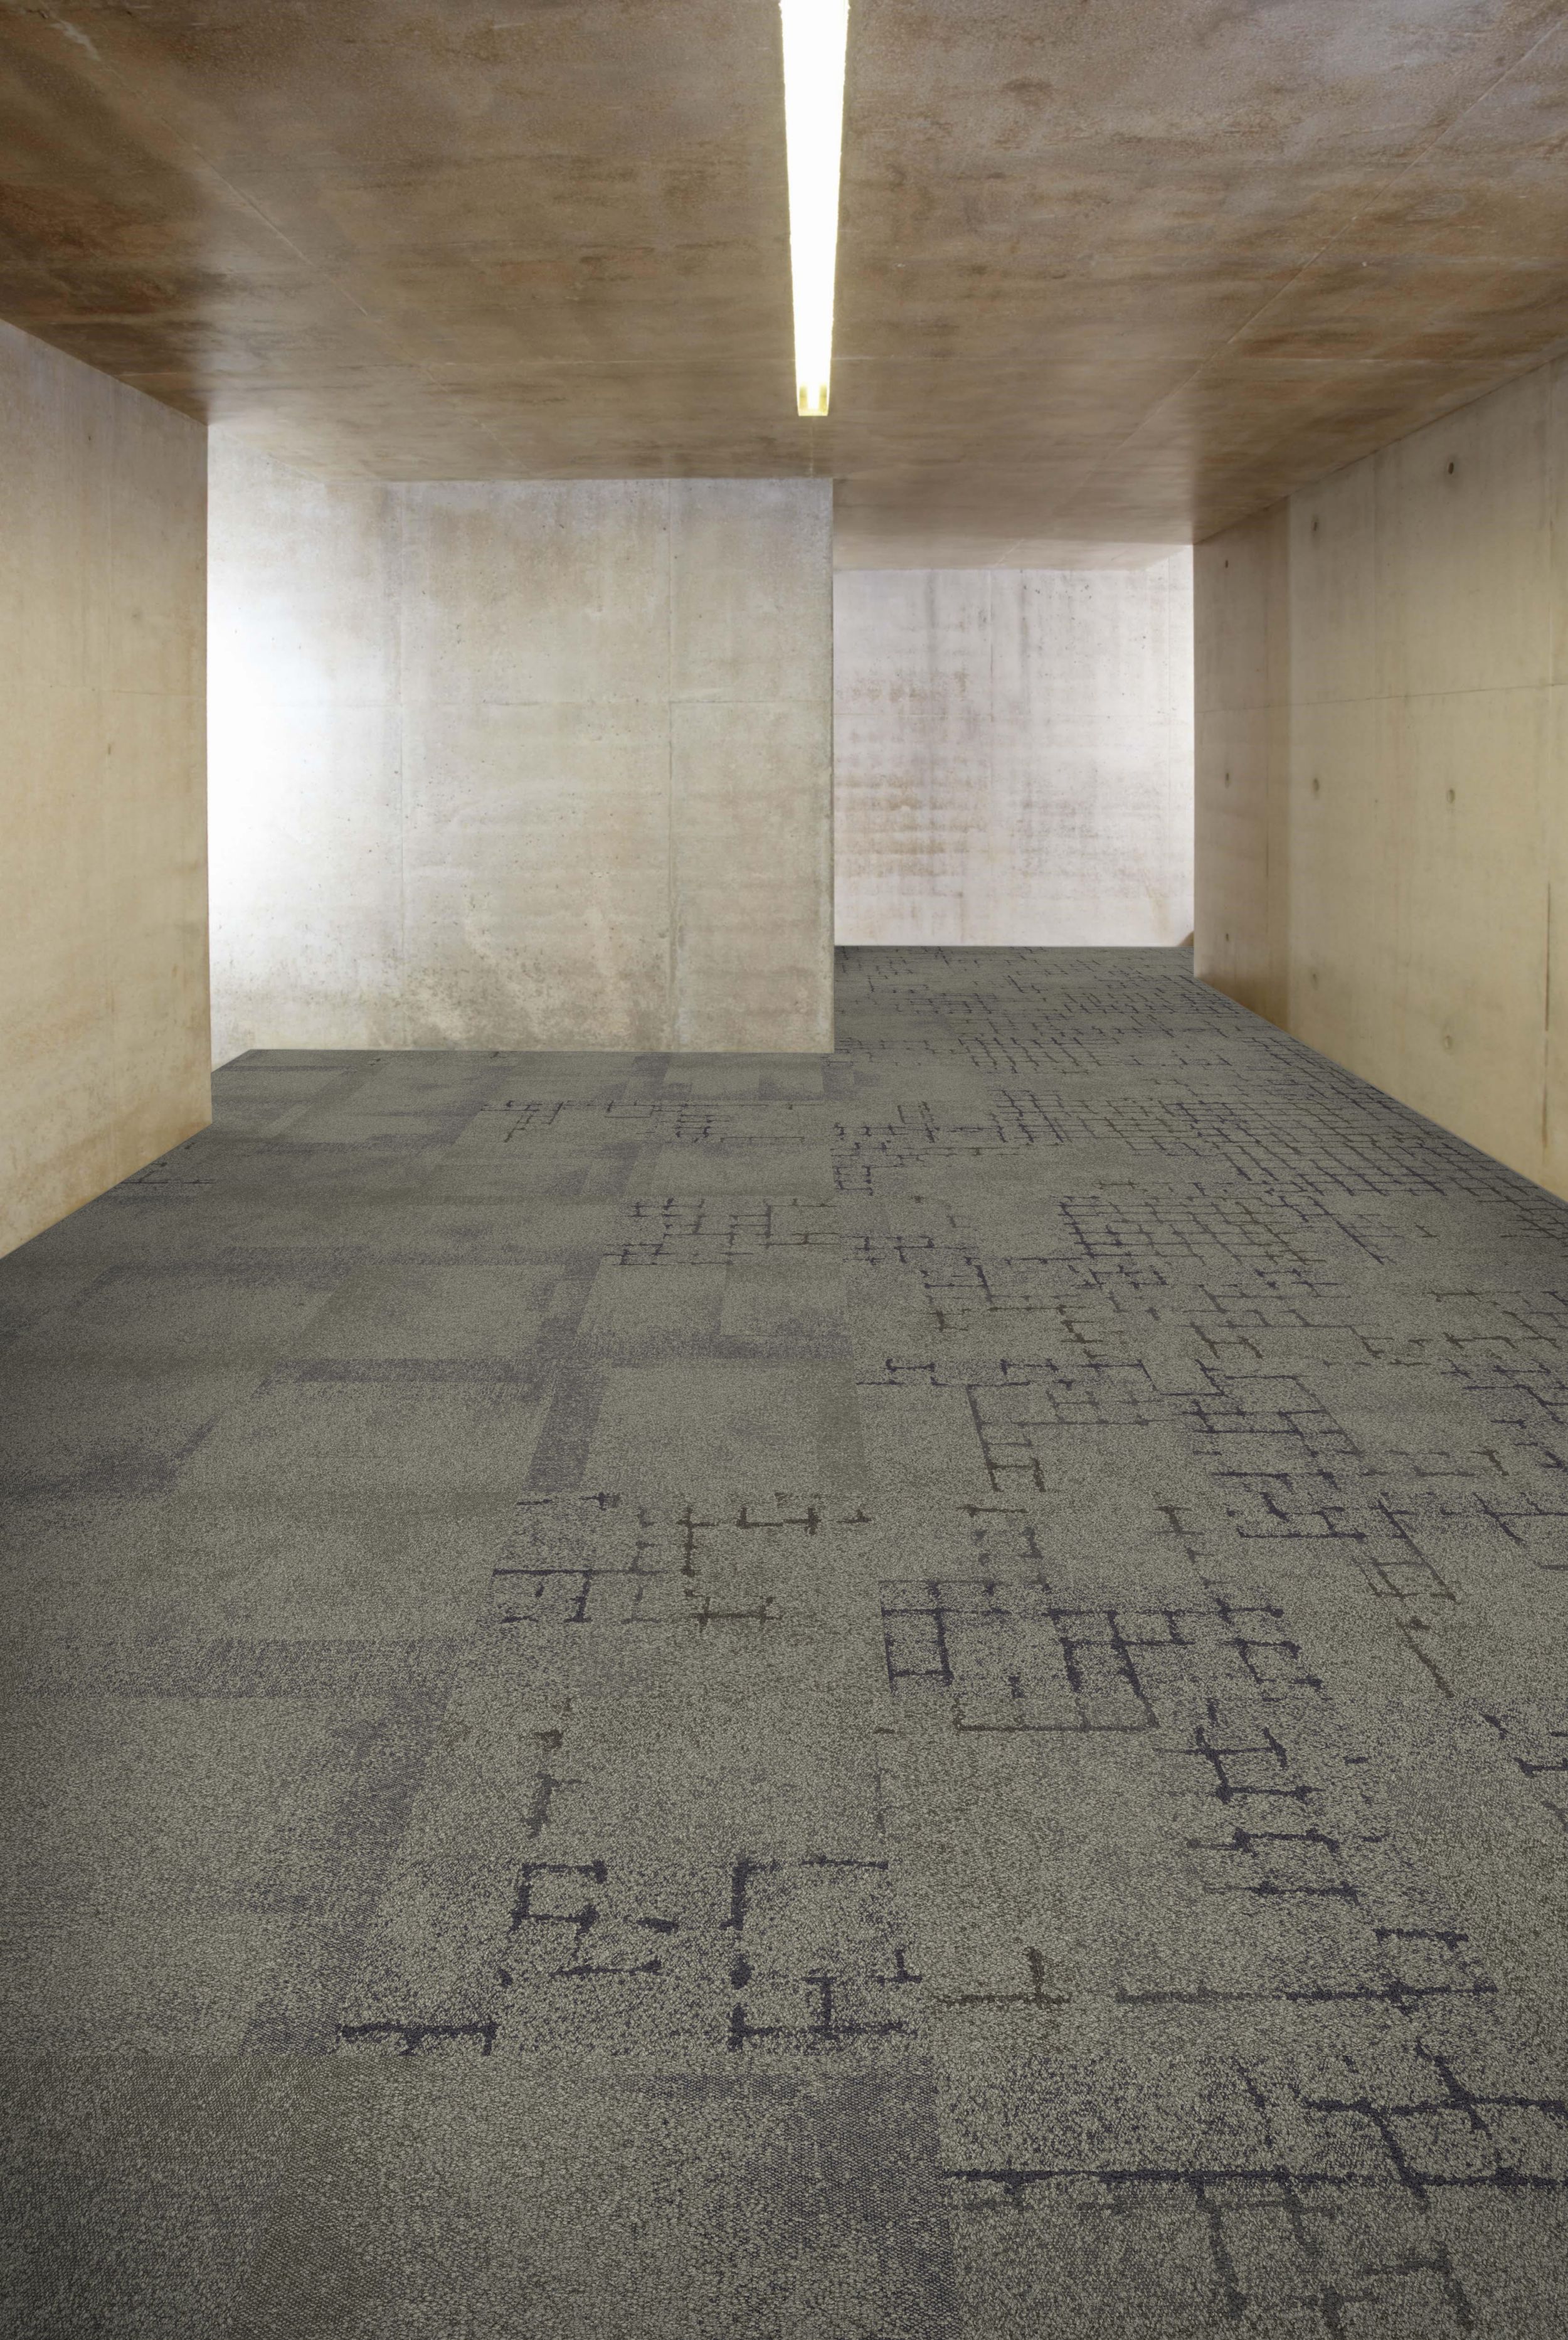 Interface Flagstone, Kerbstone and Sett in Stone carpet tile in corridor with concrete walls and ceiling numéro d’image 5